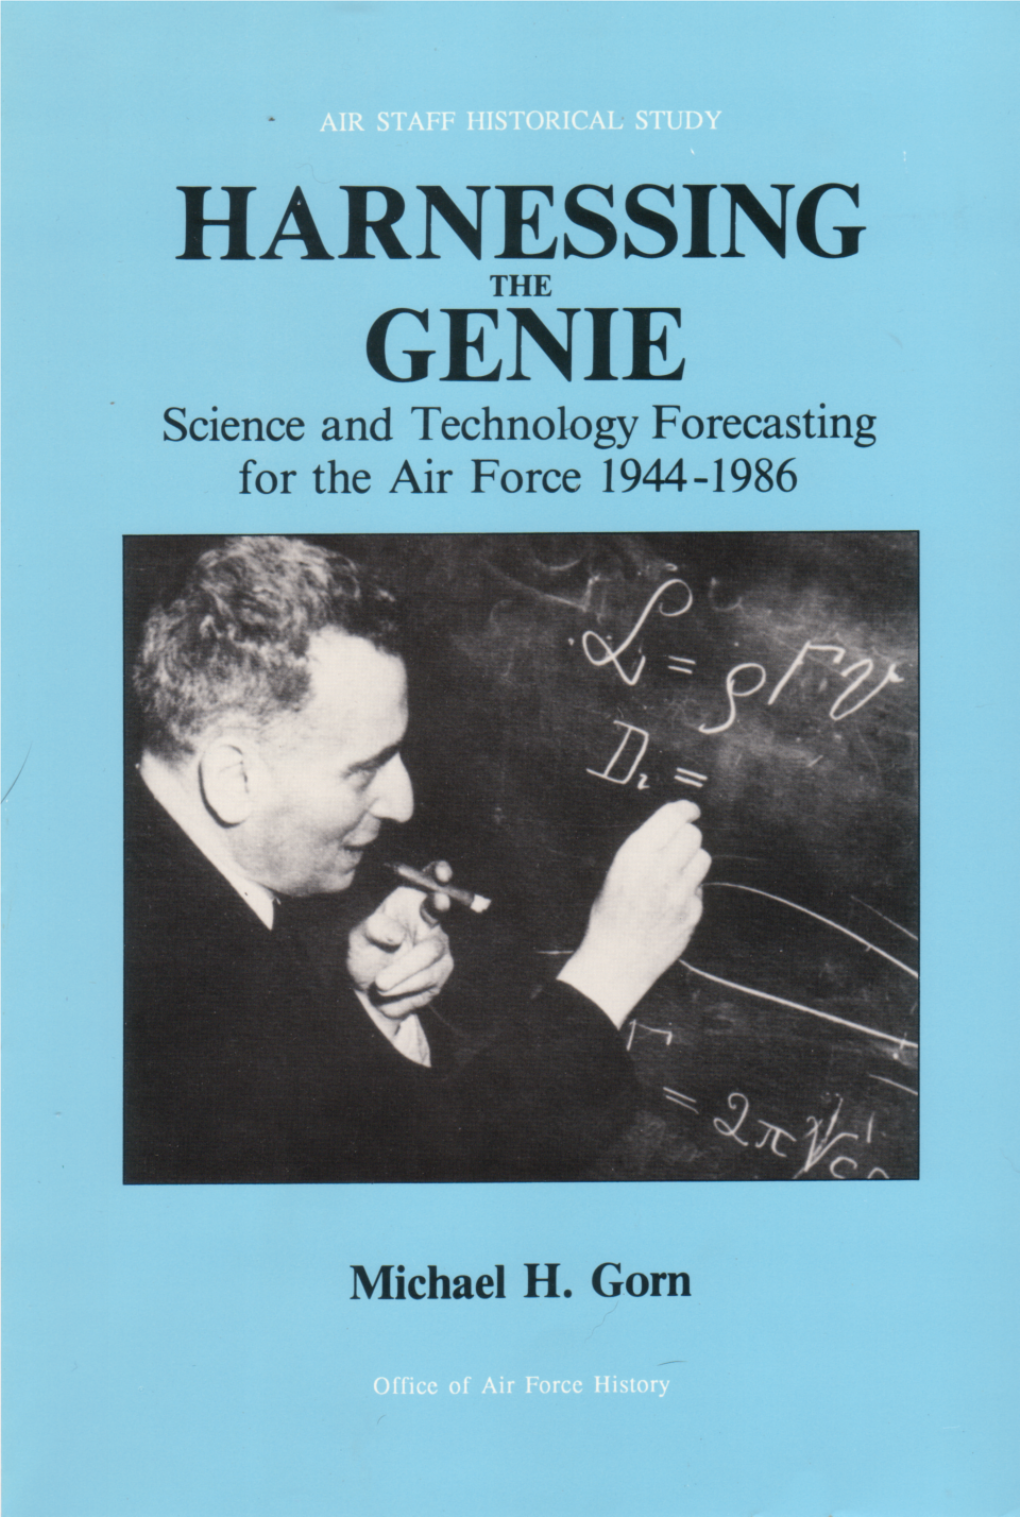 Harnessing the Genie: Science and Technology Forecasting for the Air Force, 1944-1986